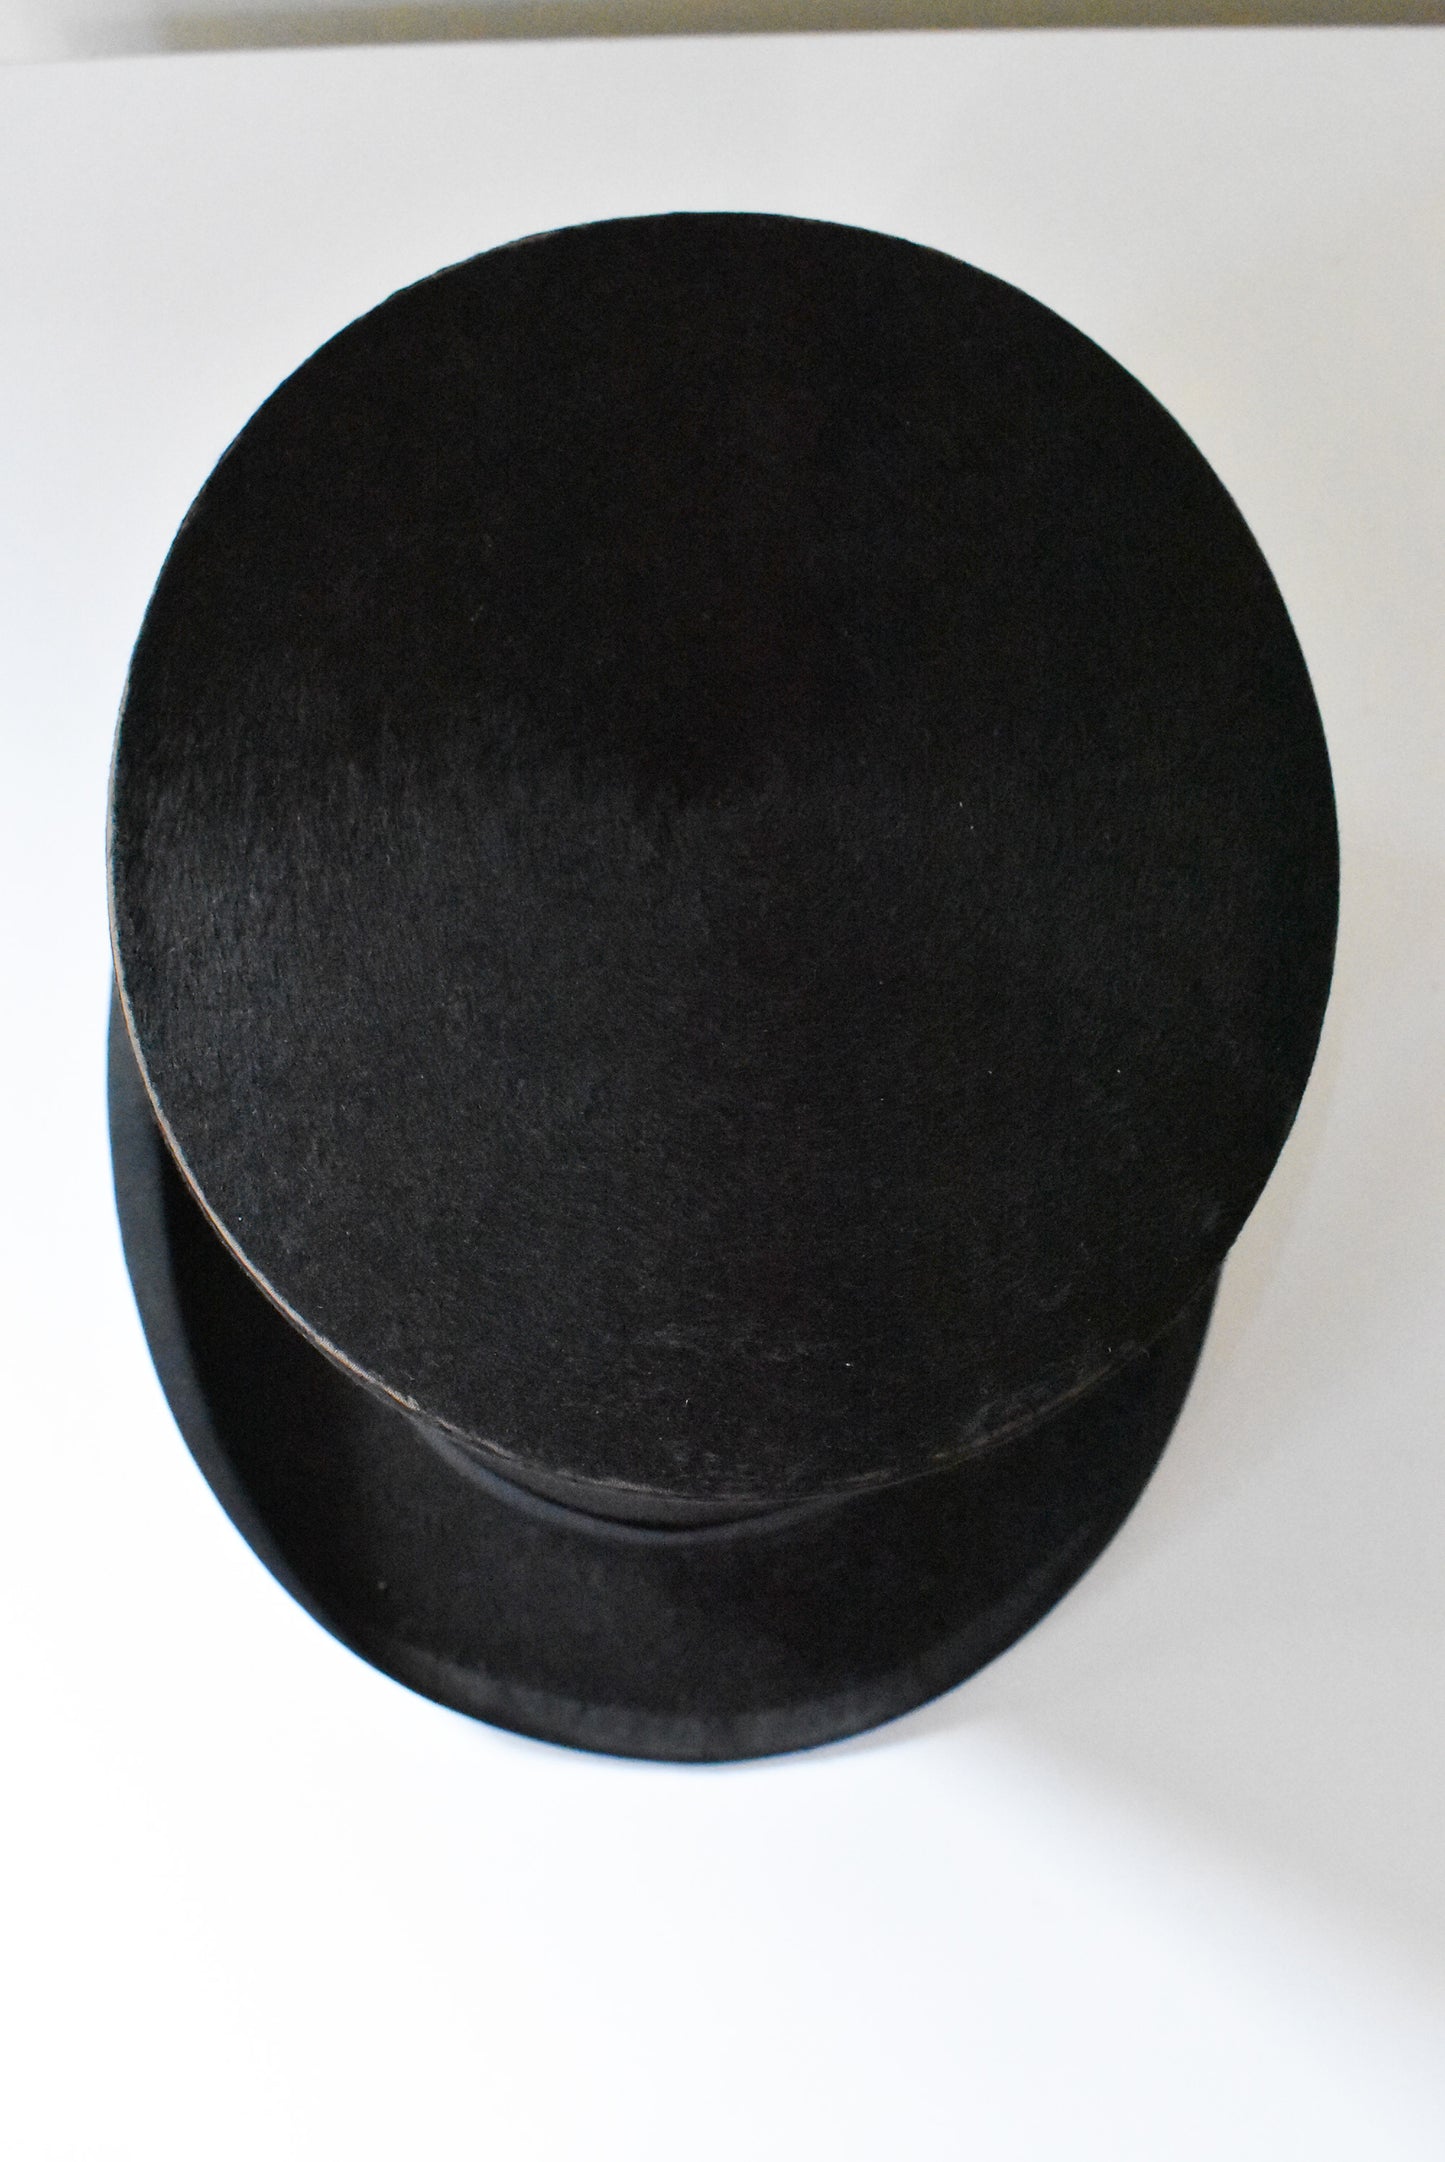 Sargood, Son and Ewen Dunedin, by royal appointment, antique 1800's beaver top hat